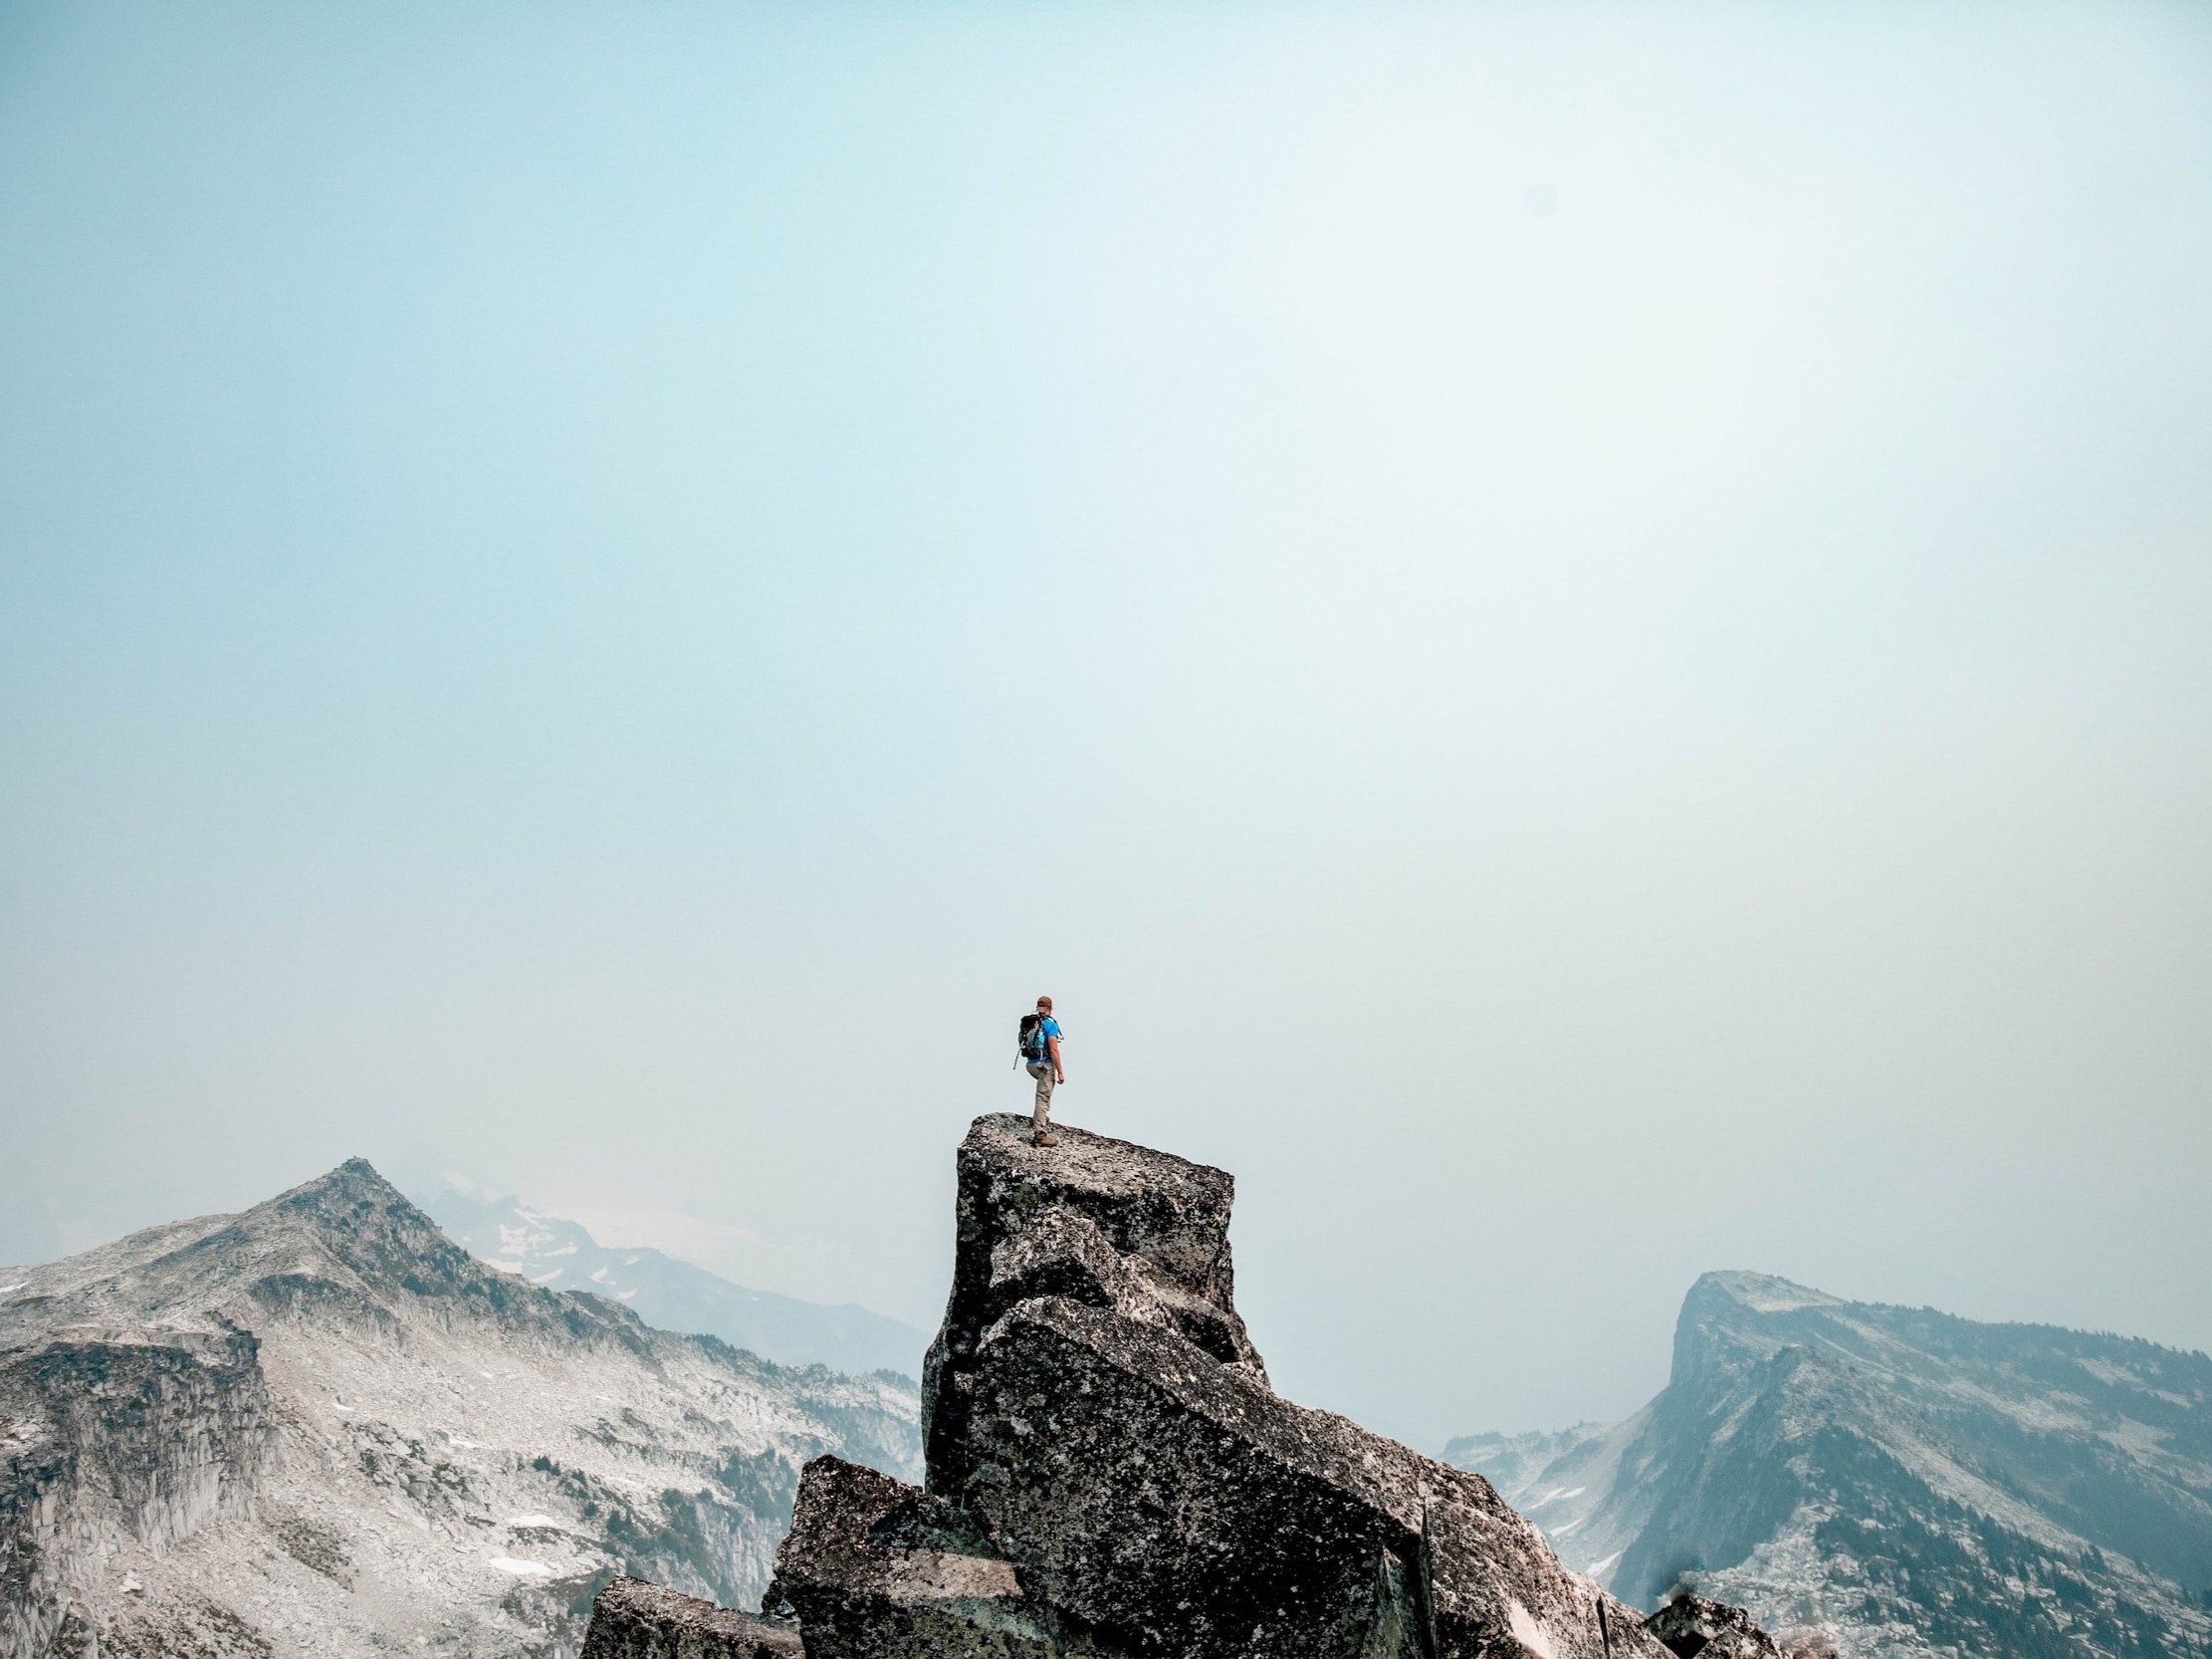 A man ascends to the peak of a mountain and looks out across the other mountains.